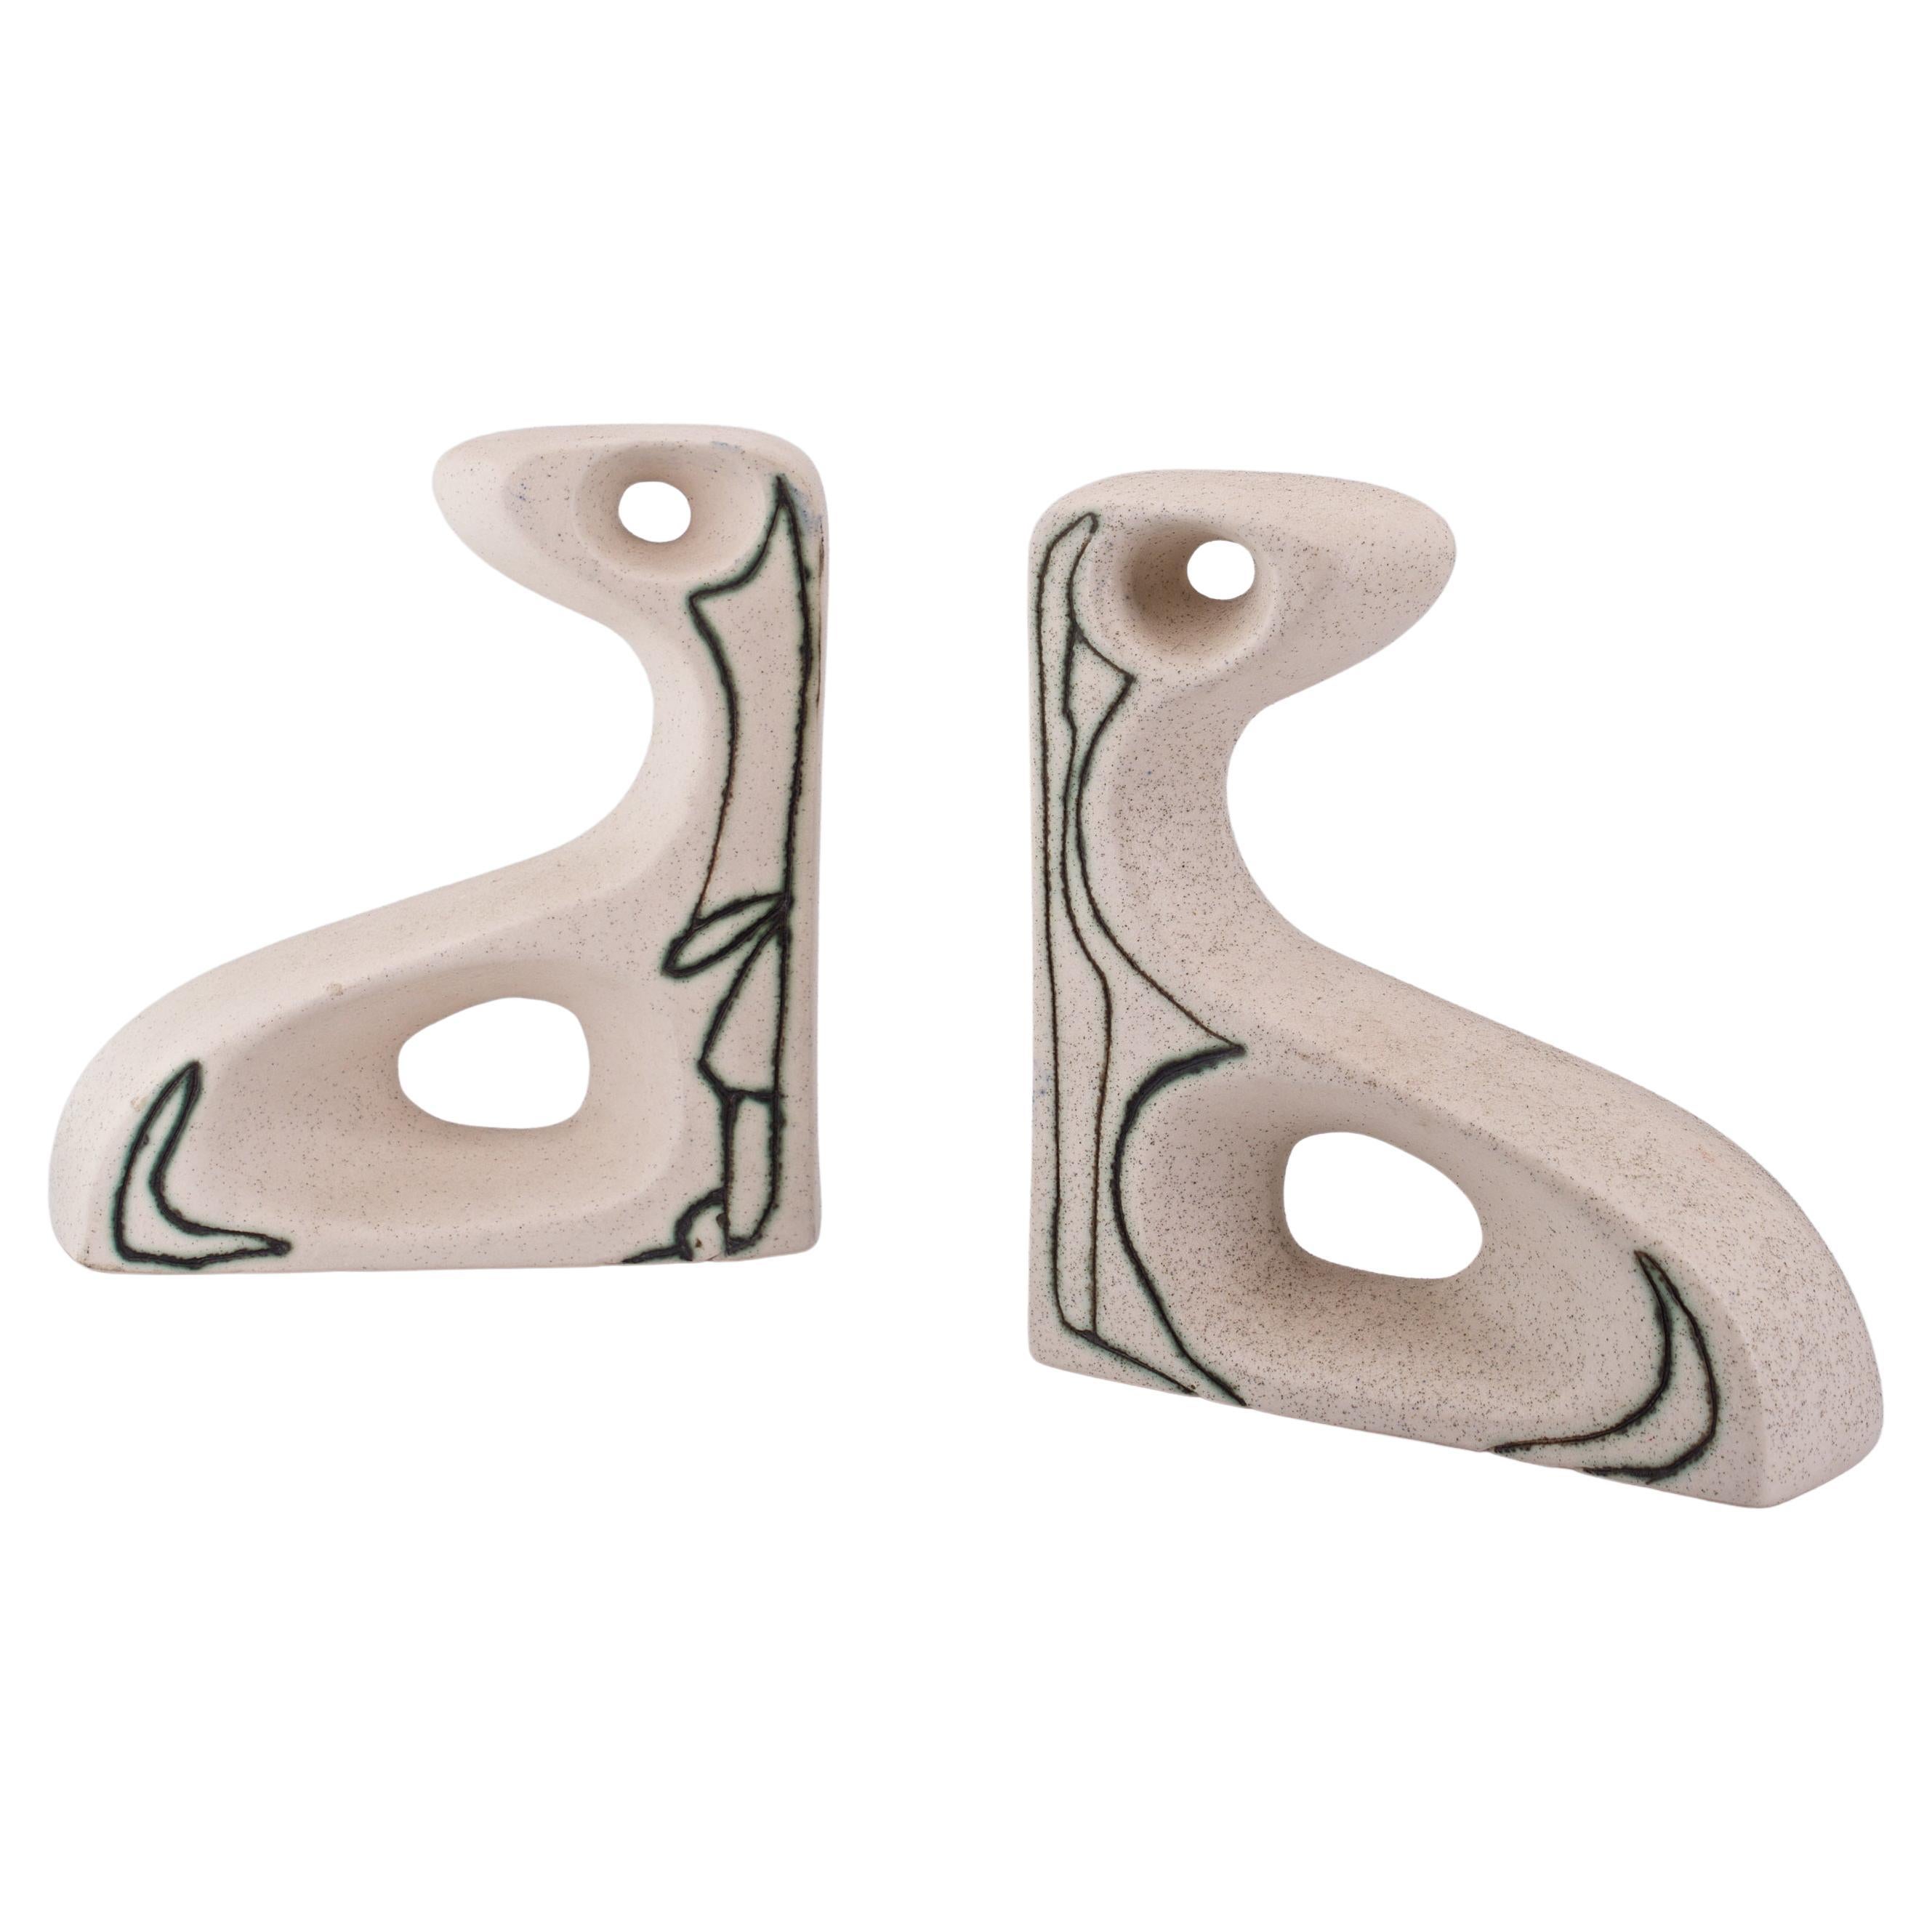 1950s Mid-Century Abstract Biomorphic Bookends